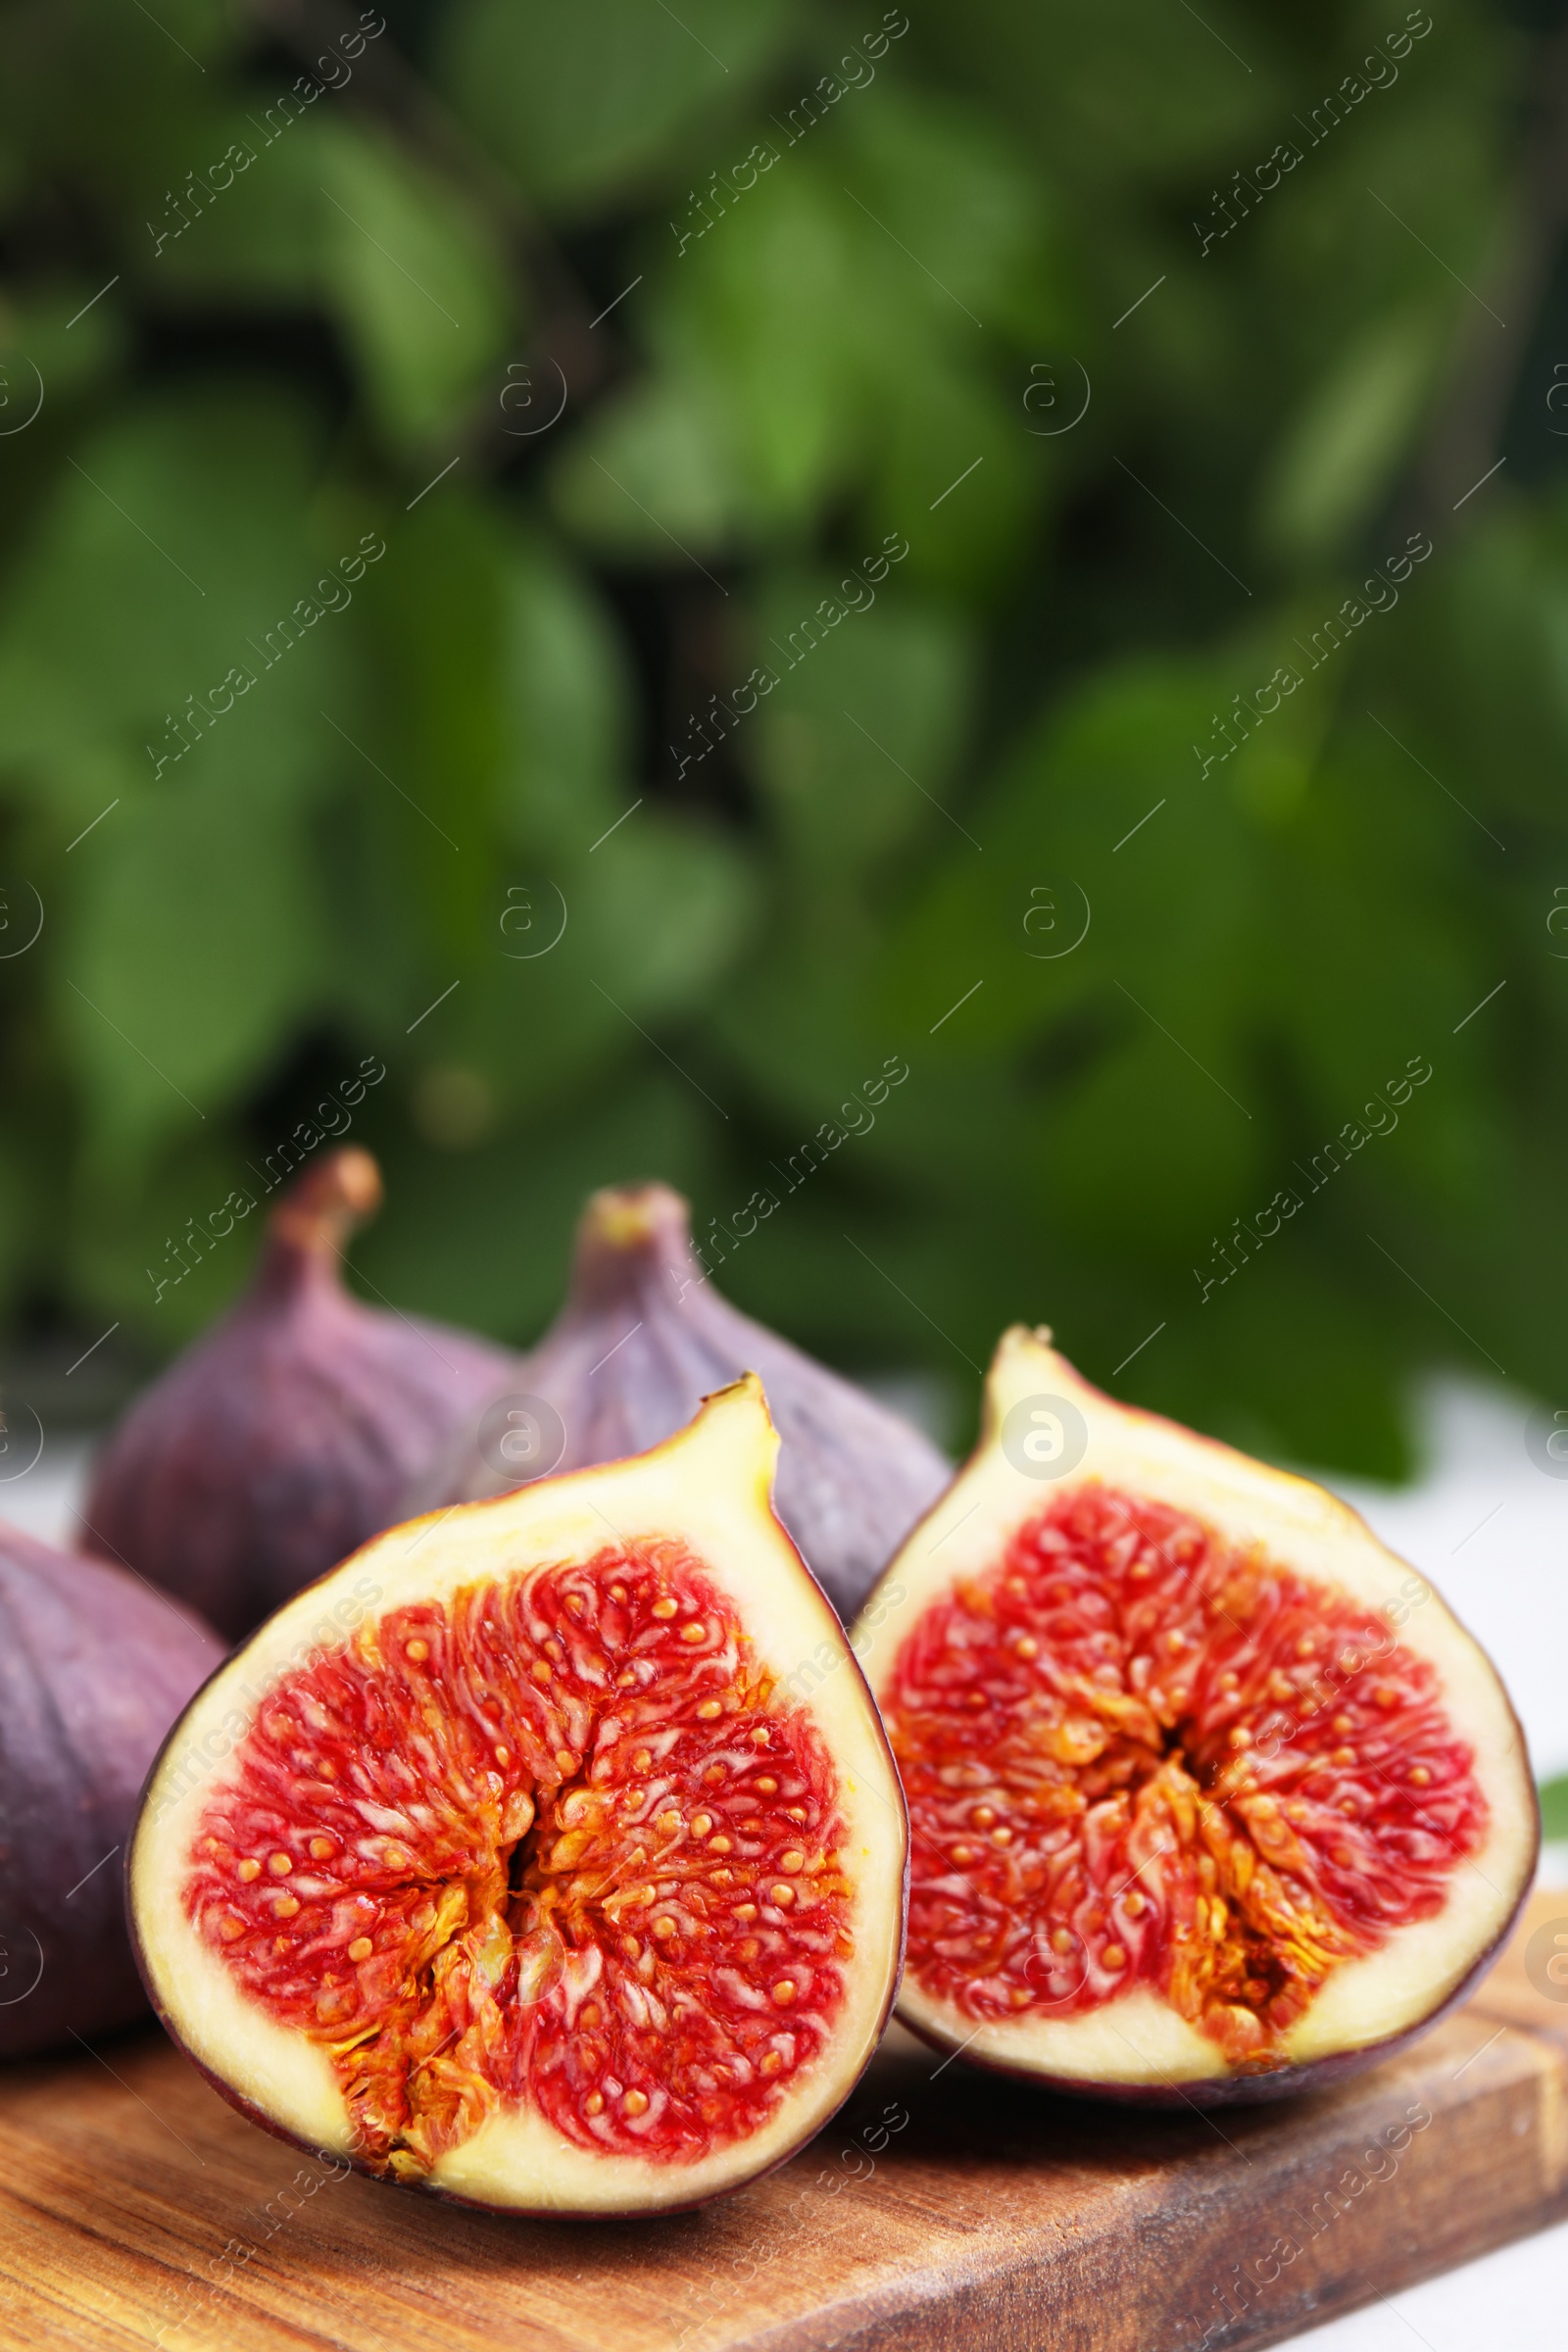 Photo of Tasty ripe figs on wooden board against blurred background